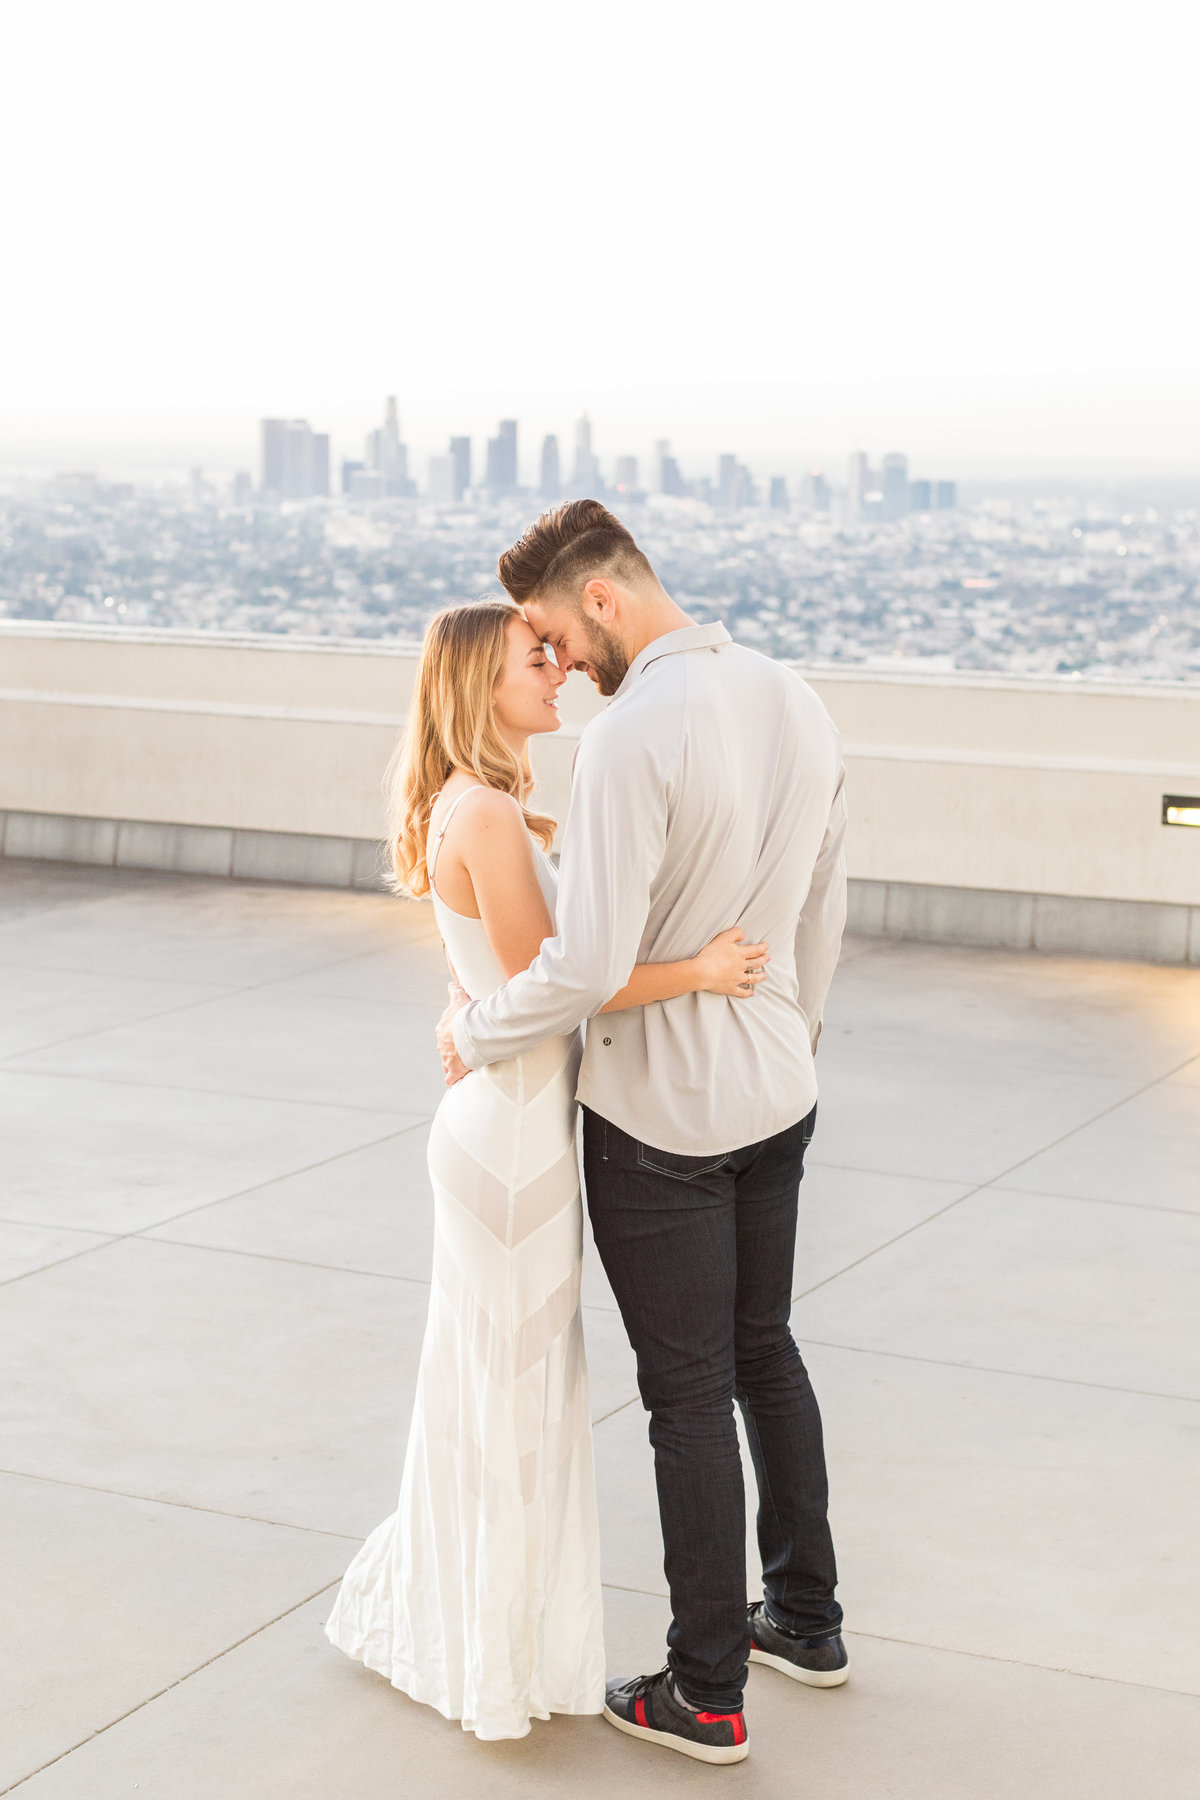 lucas-ariana-los-angeles-engagement-session-25